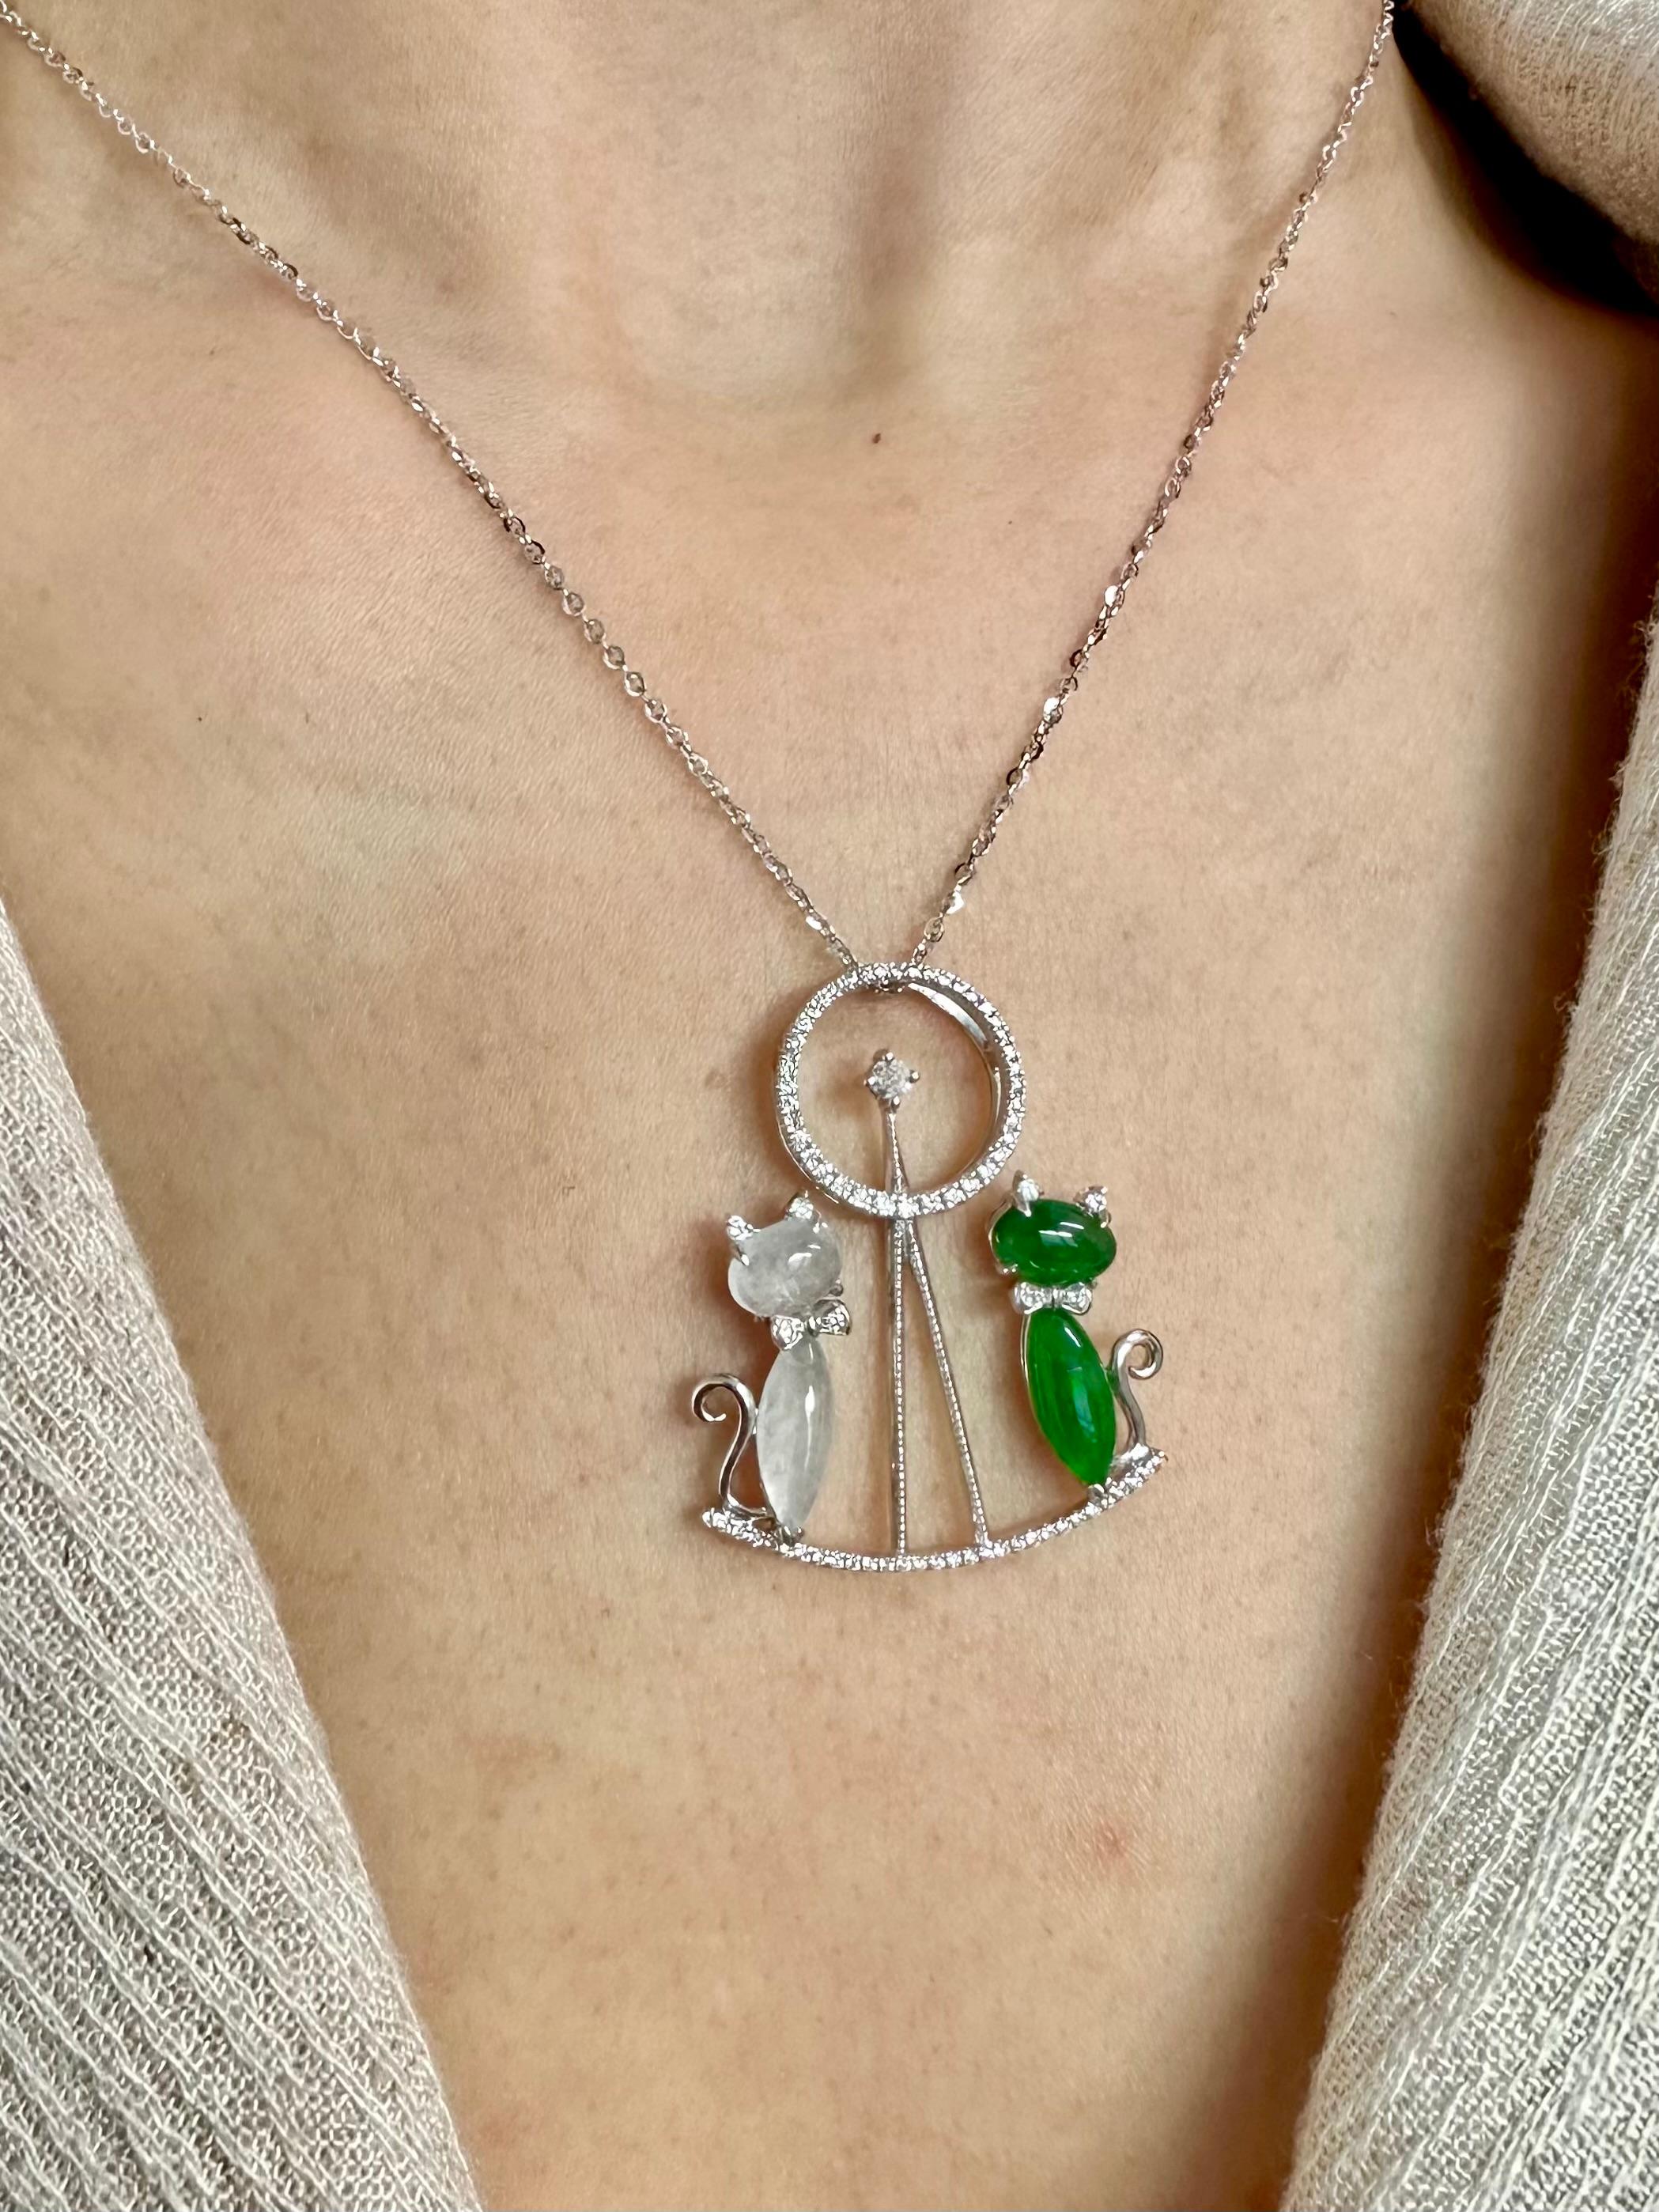 Please check out the HD video. The jades are certified natural. These jades have a beautiful balance of color saturation and transparency! There are 2 icy jades and 2 apple green jades that make up the 2 cats on a seesaw. The pendant is set in 18k